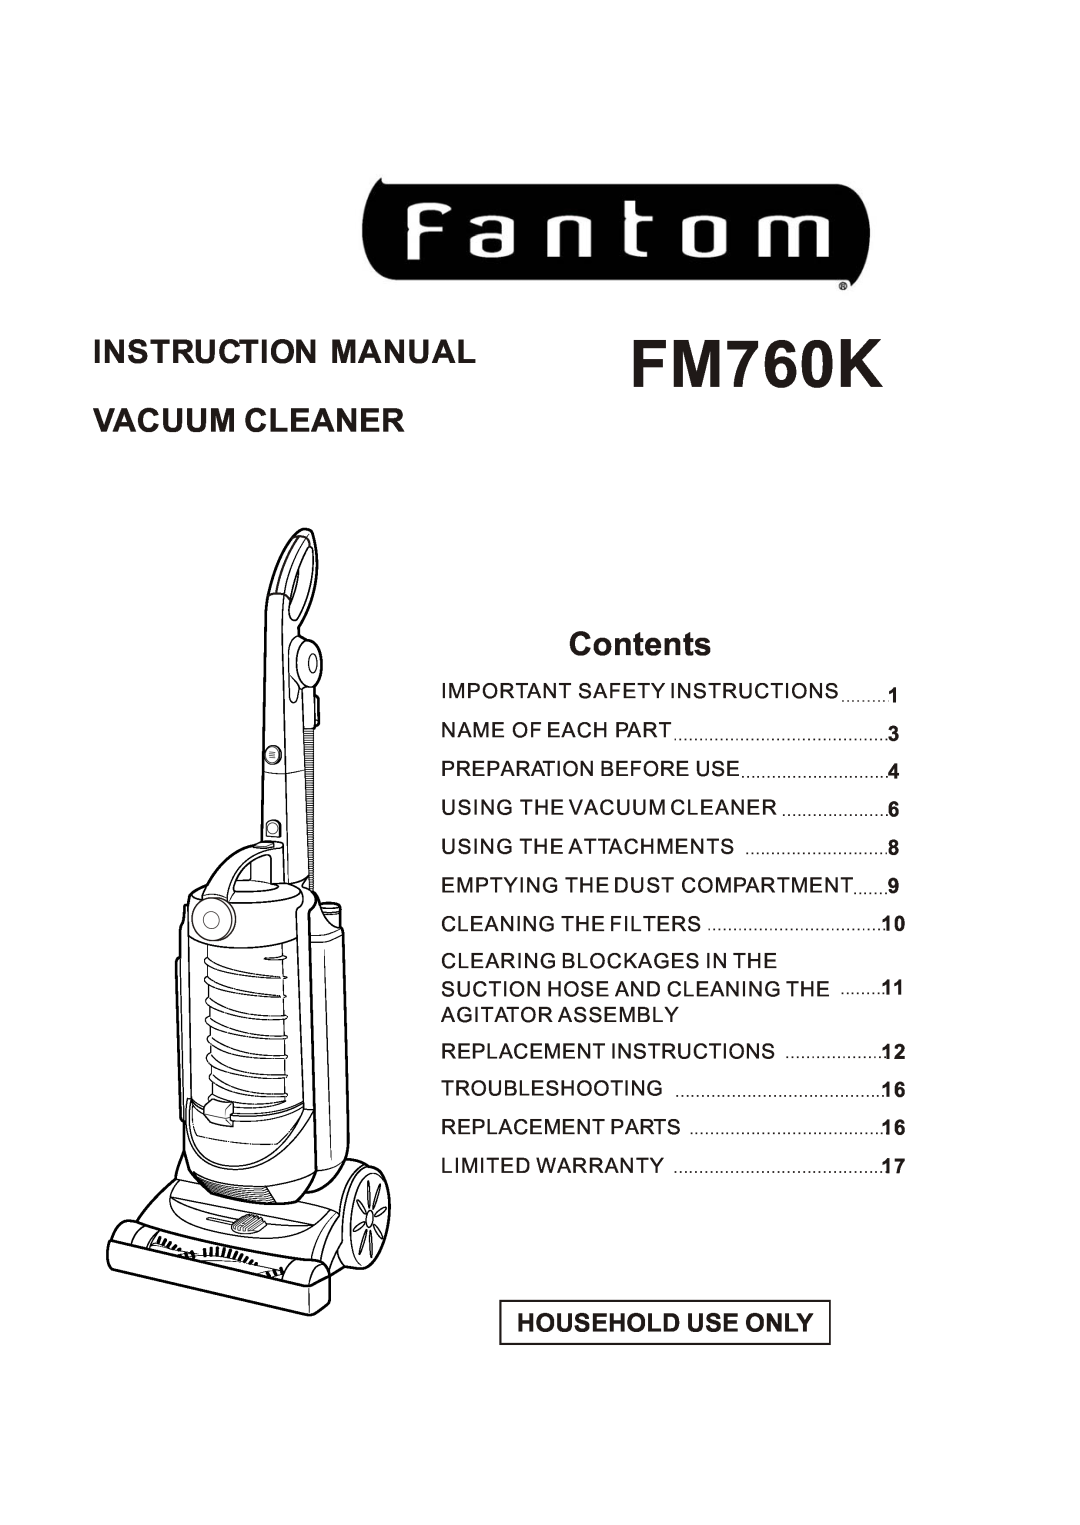 Fantom Vacuum FM760K instruction manual Vacuum Cleaner, Contents, Household Use Only 